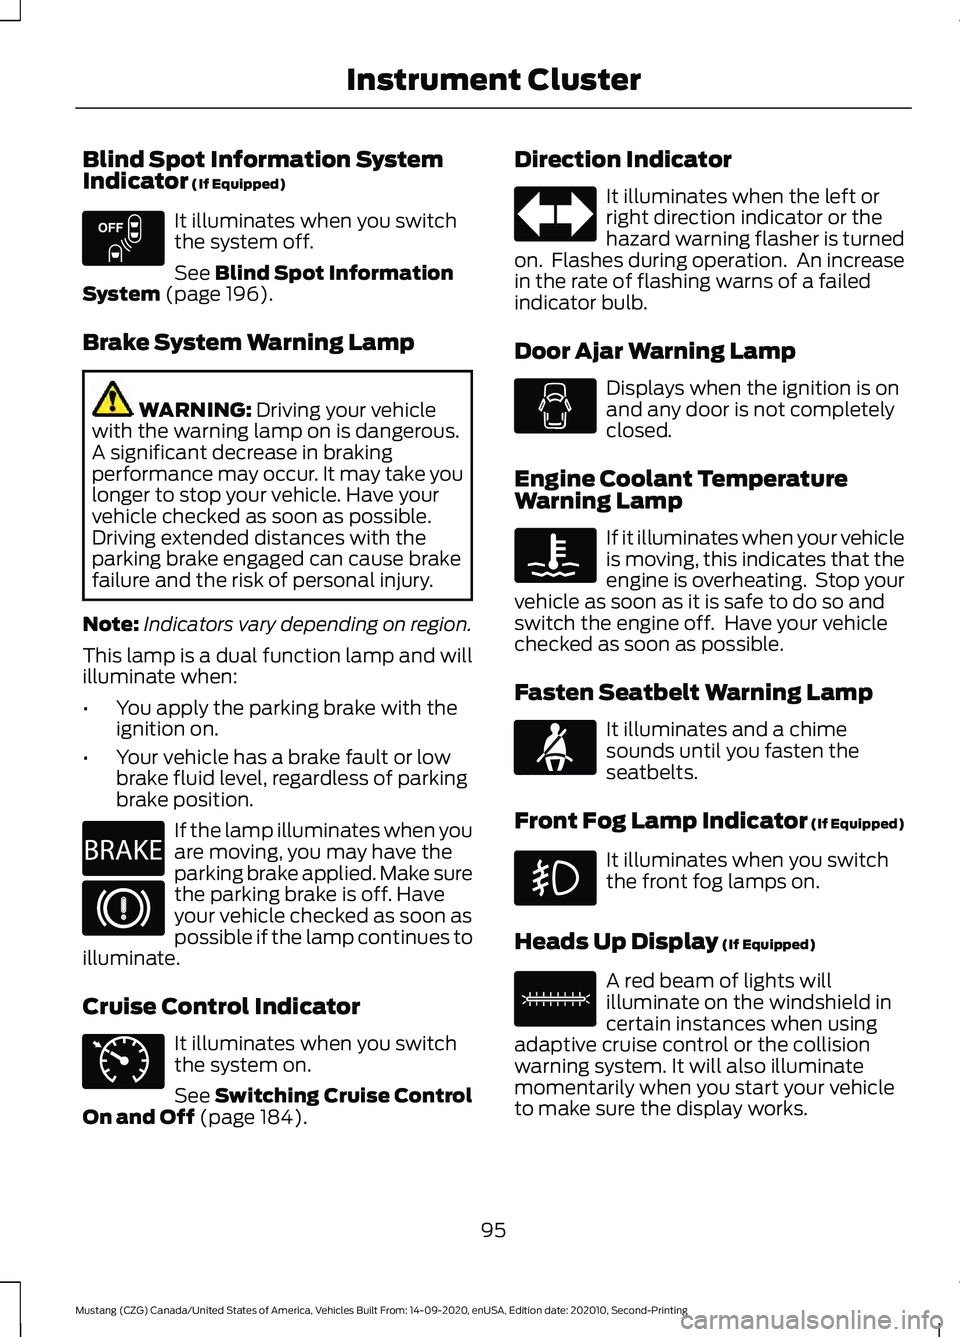 FORD MUSTANG 2021  Owners Manual Blind Spot Information System
Indicator (If Equipped)
It illuminates when you switch
the system off.
See 
Blind Spot Information
System (page 196).
Brake System Warning Lamp WARNING: 
Driving your veh